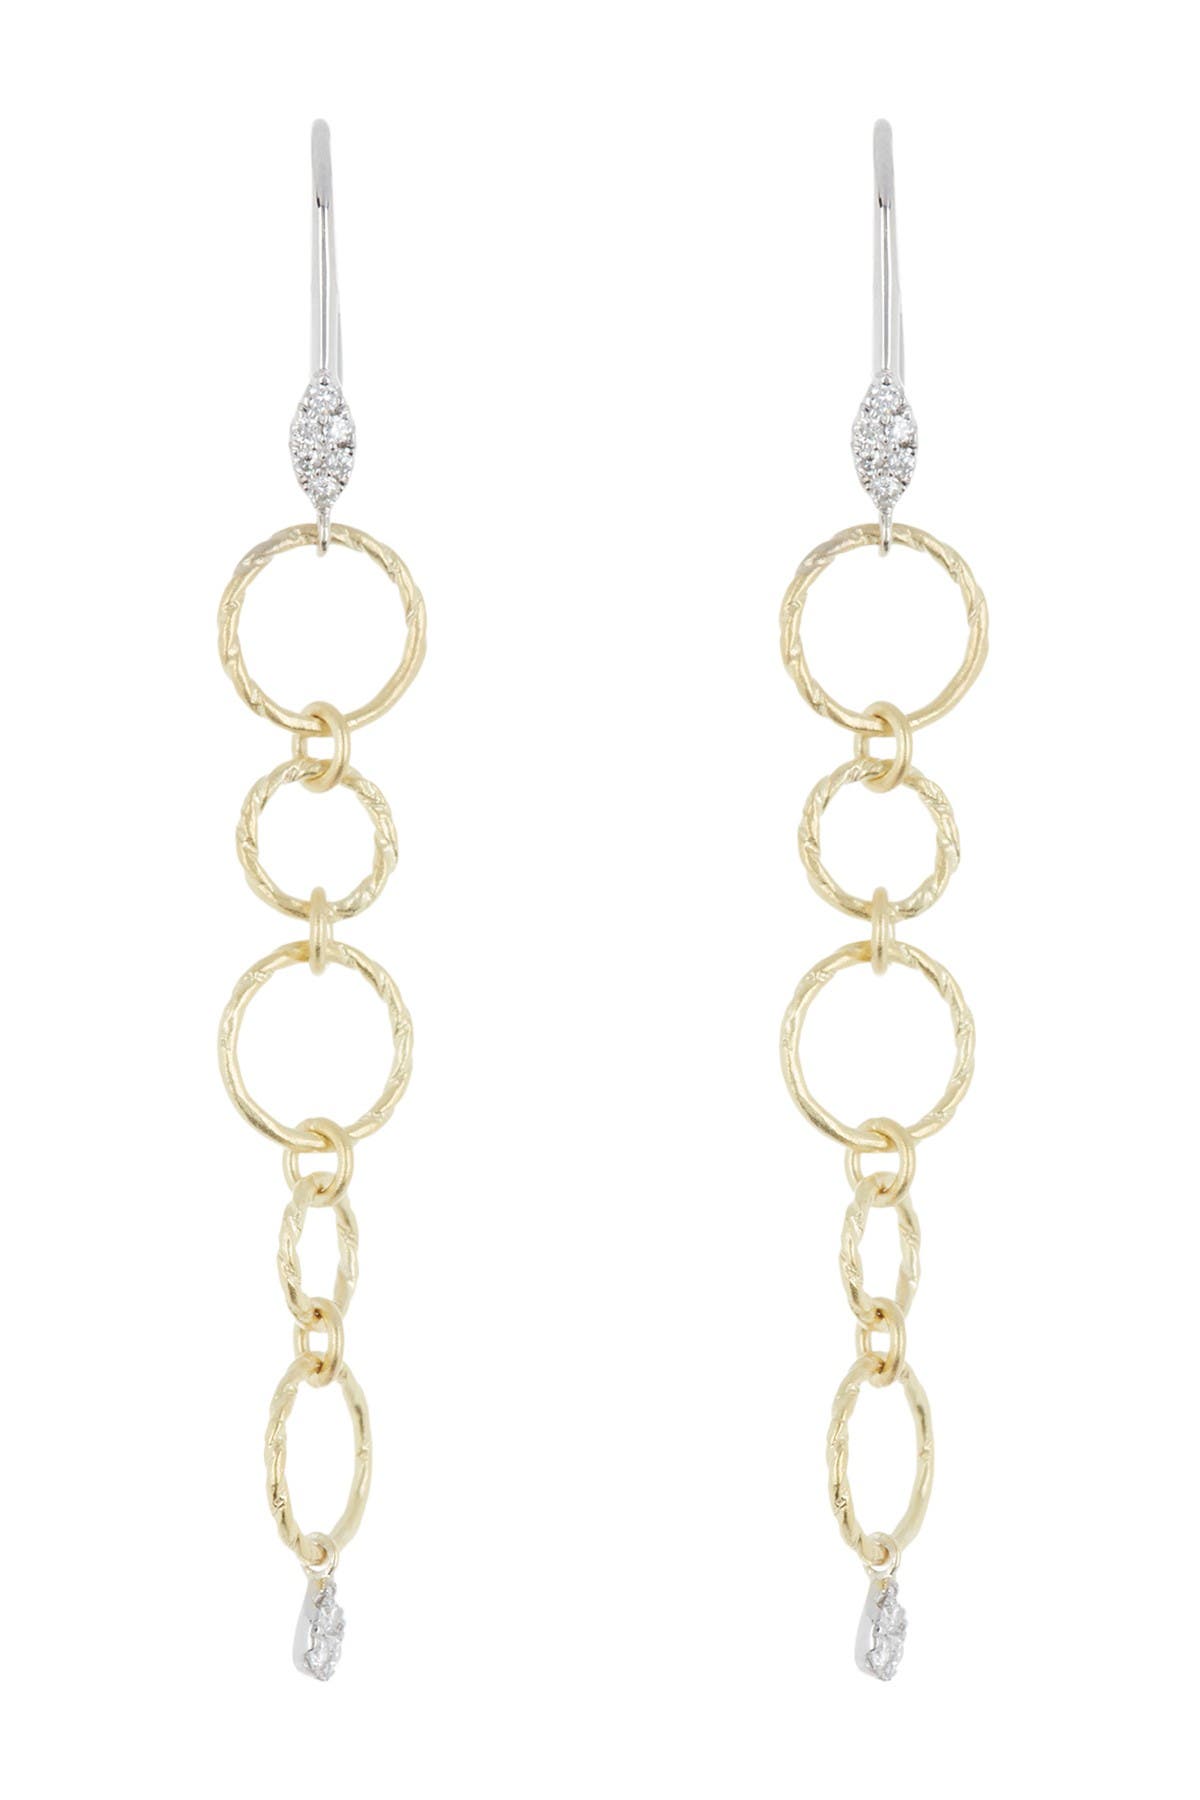 Meira T Two-tone 14k Gold Pave Diamond Link Drop Earrings In Yellow